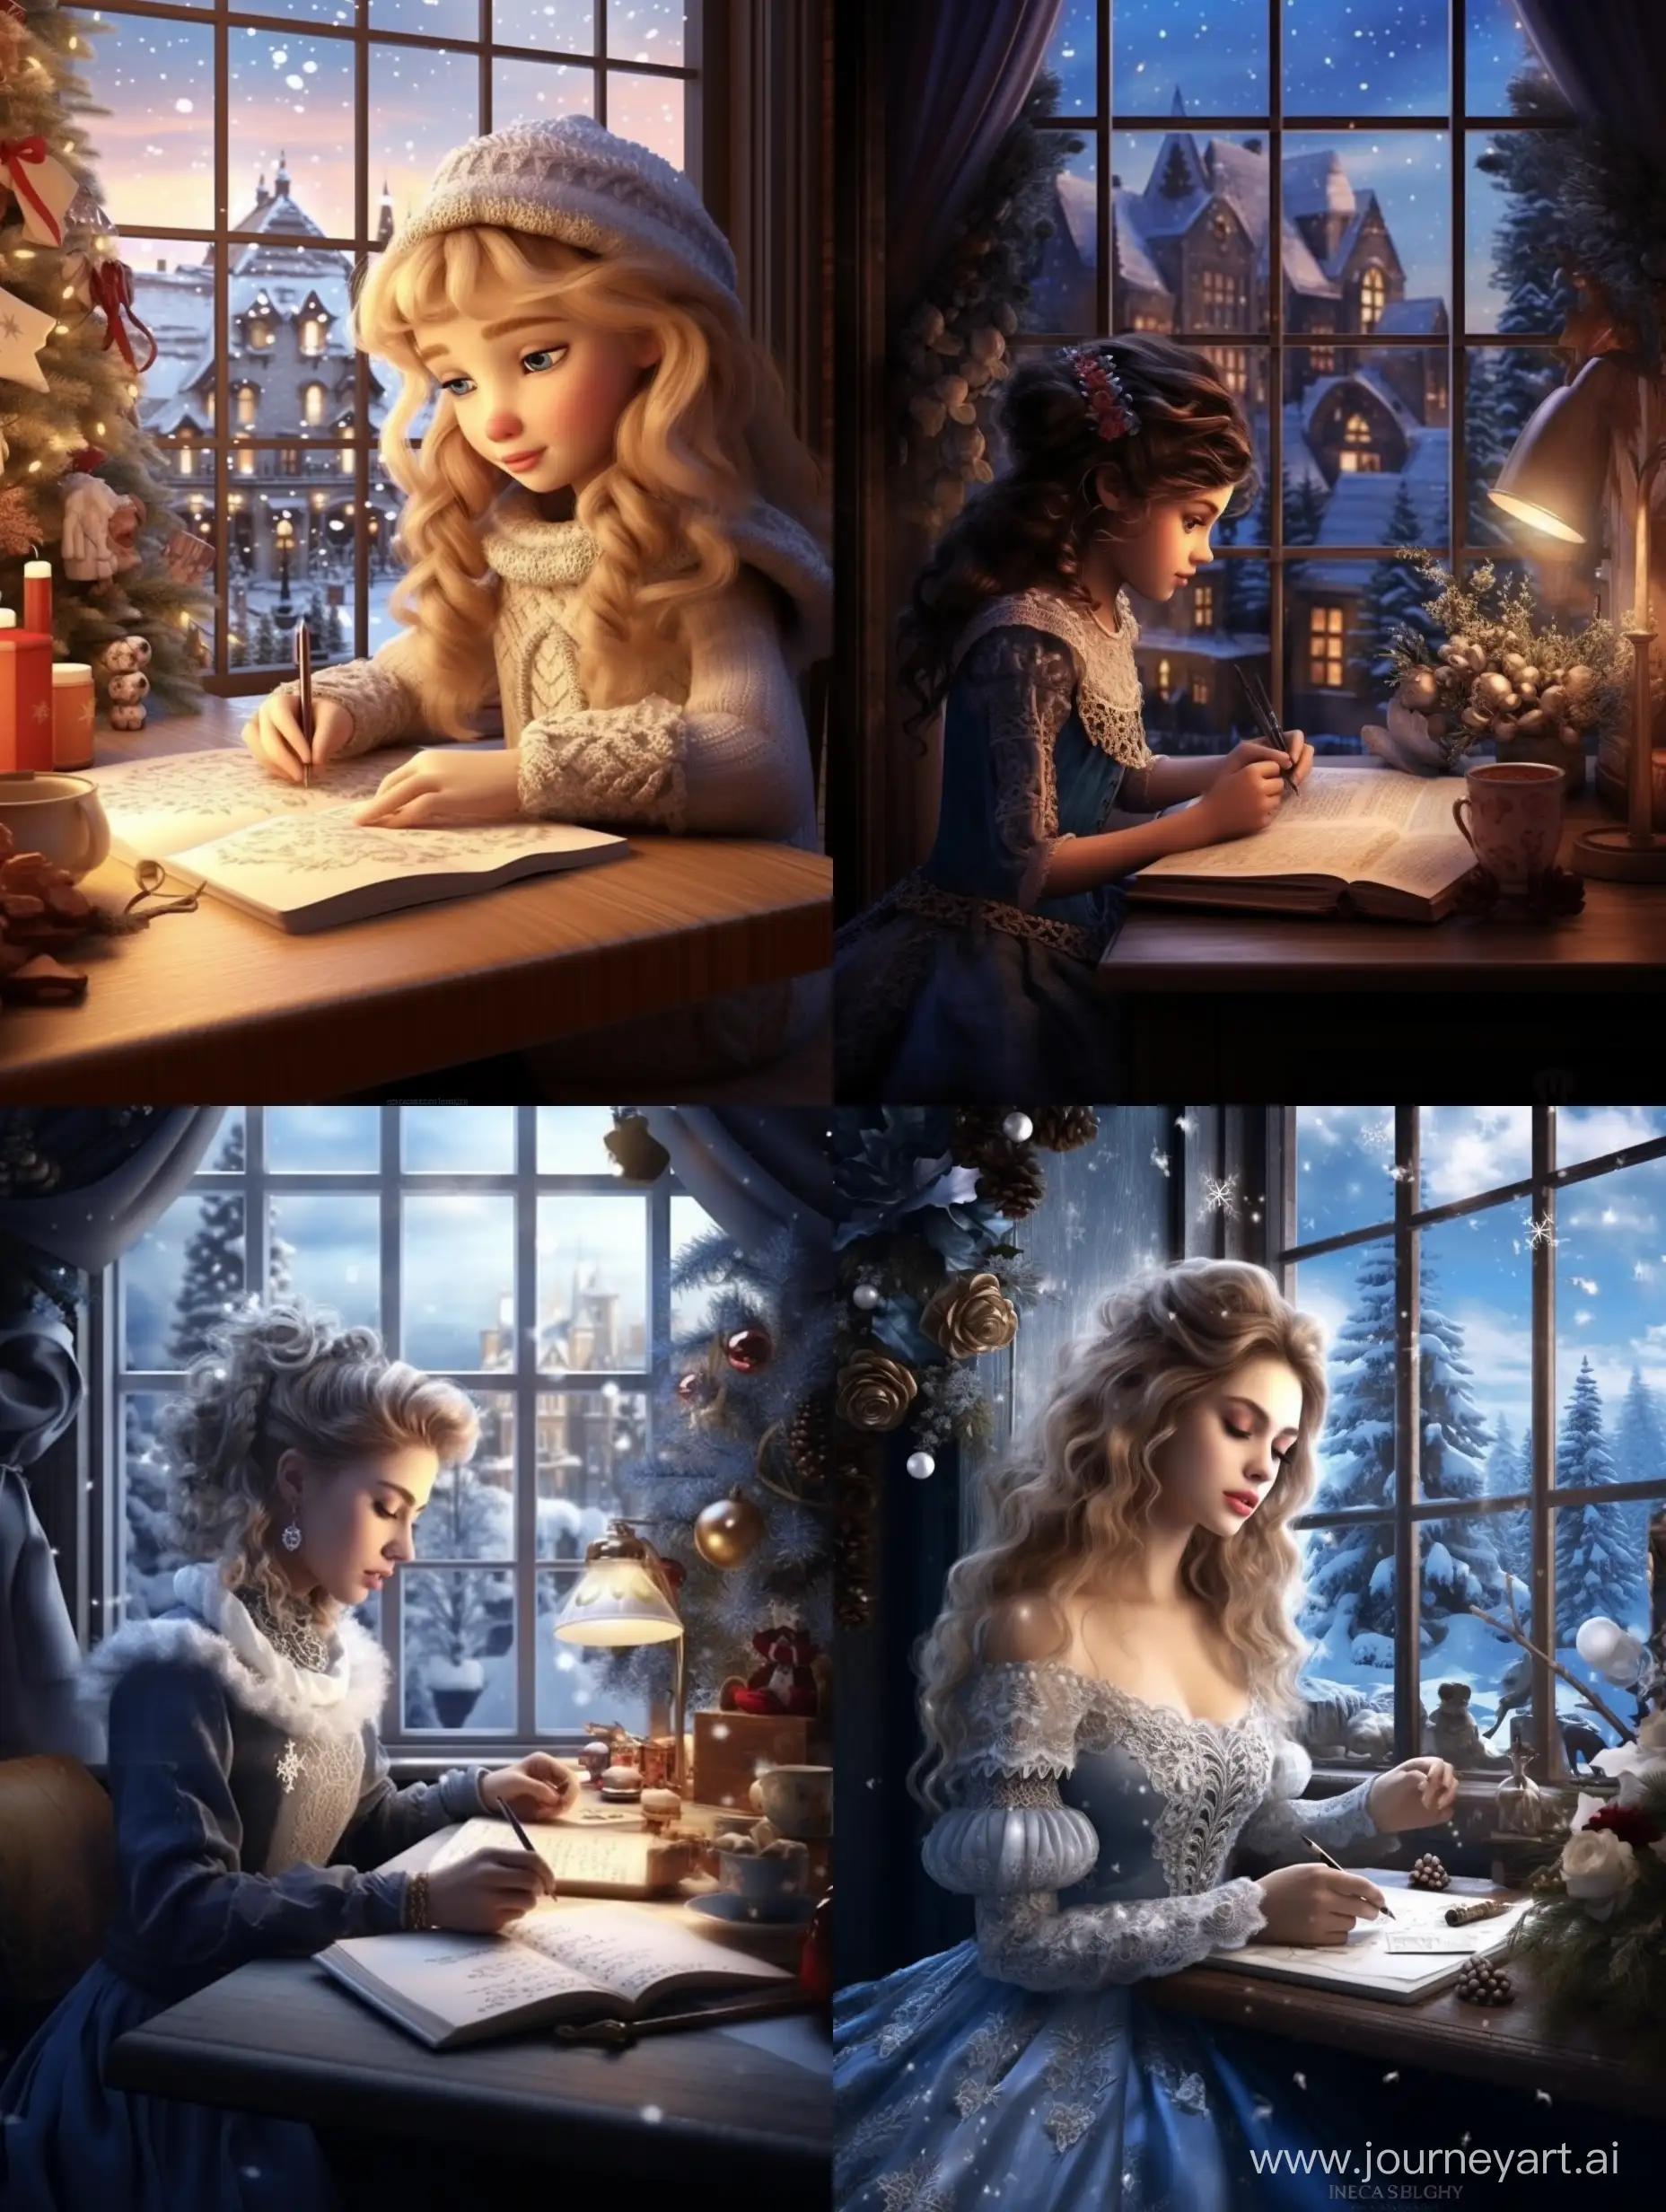 BlueEyed-European-Girl-Writing-Christmas-Cards-by-a-Winter-Window